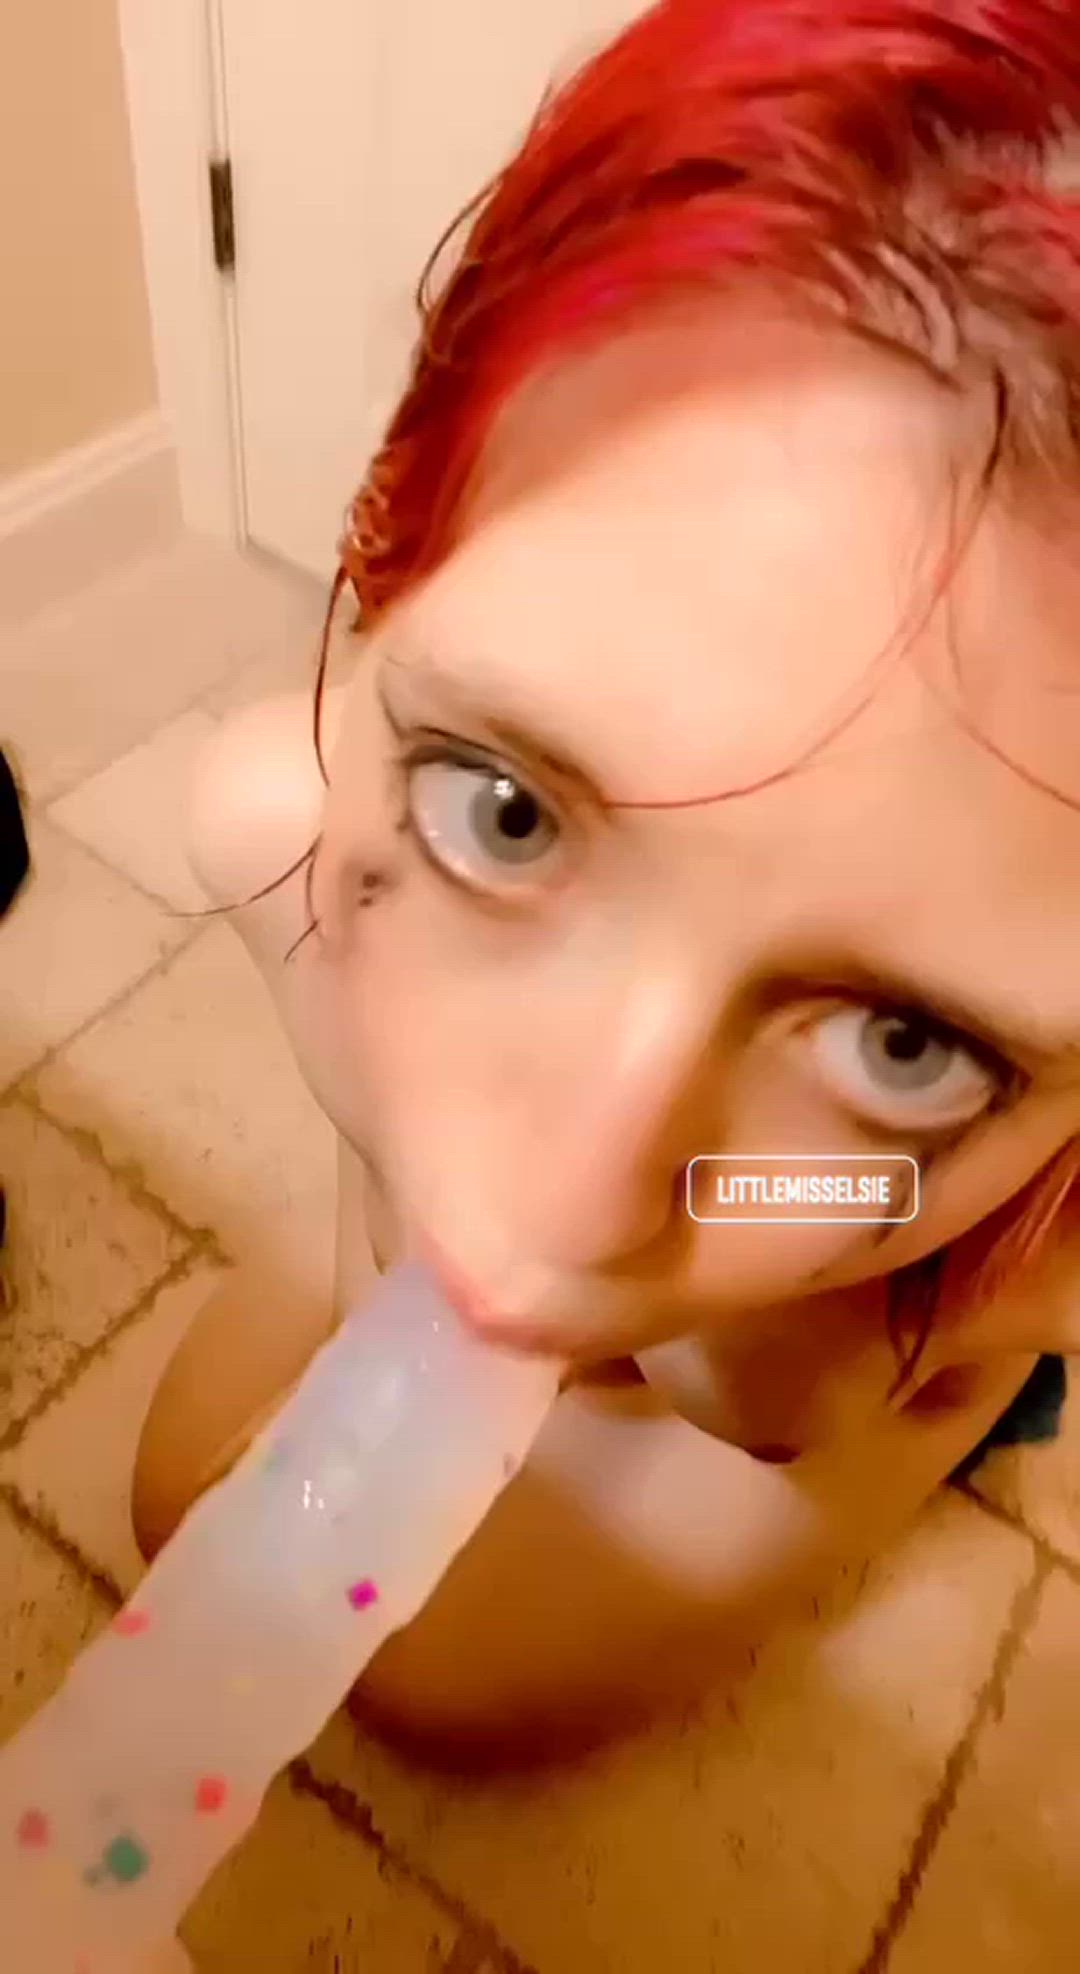 Teen porn video with onlyfans model littlemasochisms <strong>@littlemasochisms</strong>